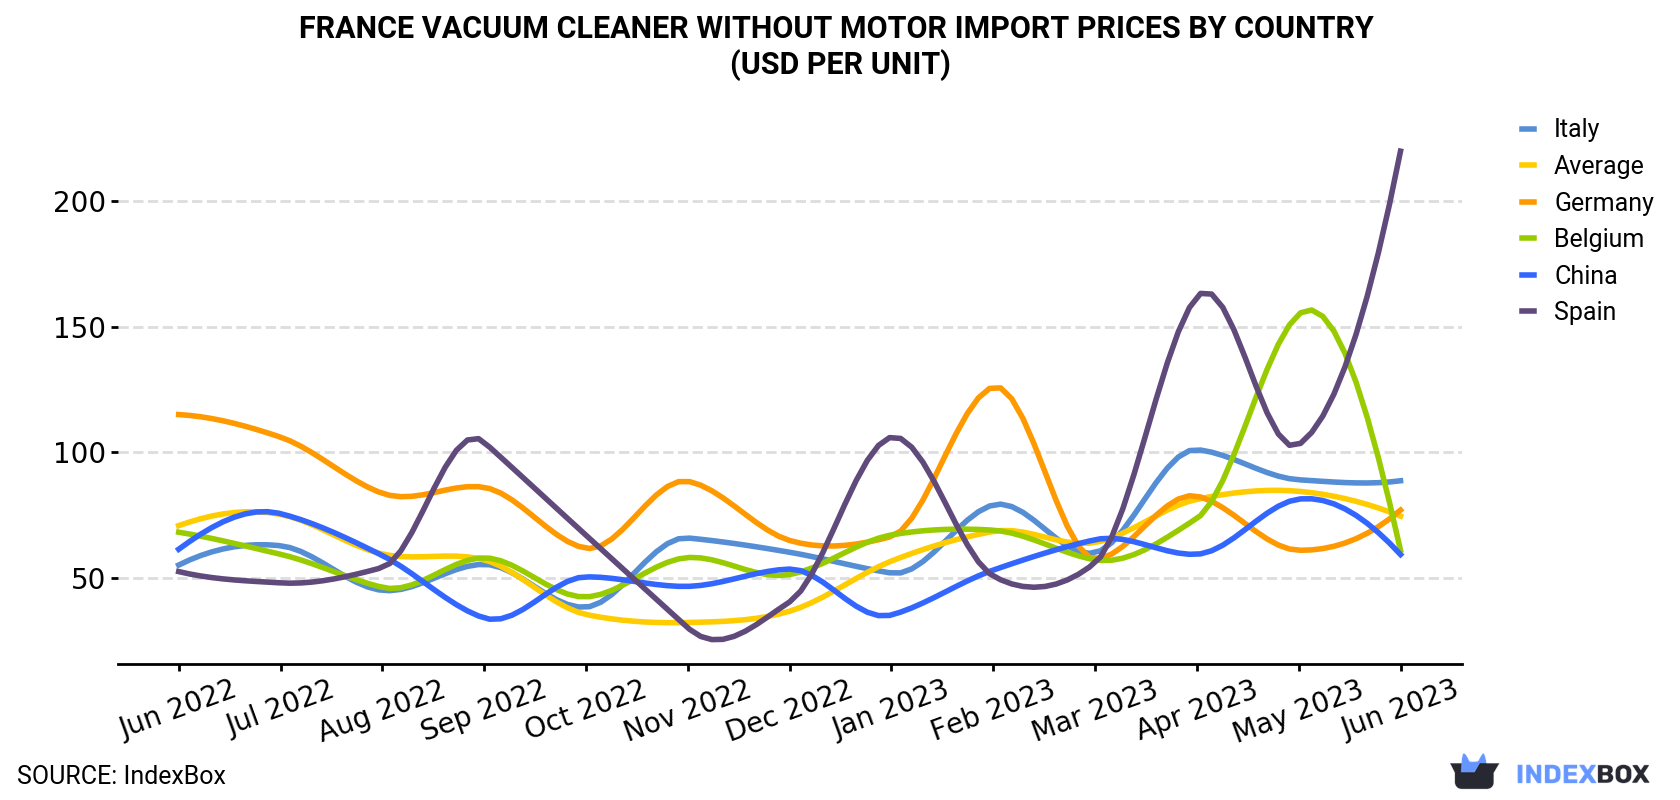 France Vacuum Cleaner Without Motor Import Prices By Country (USD Per Unit)